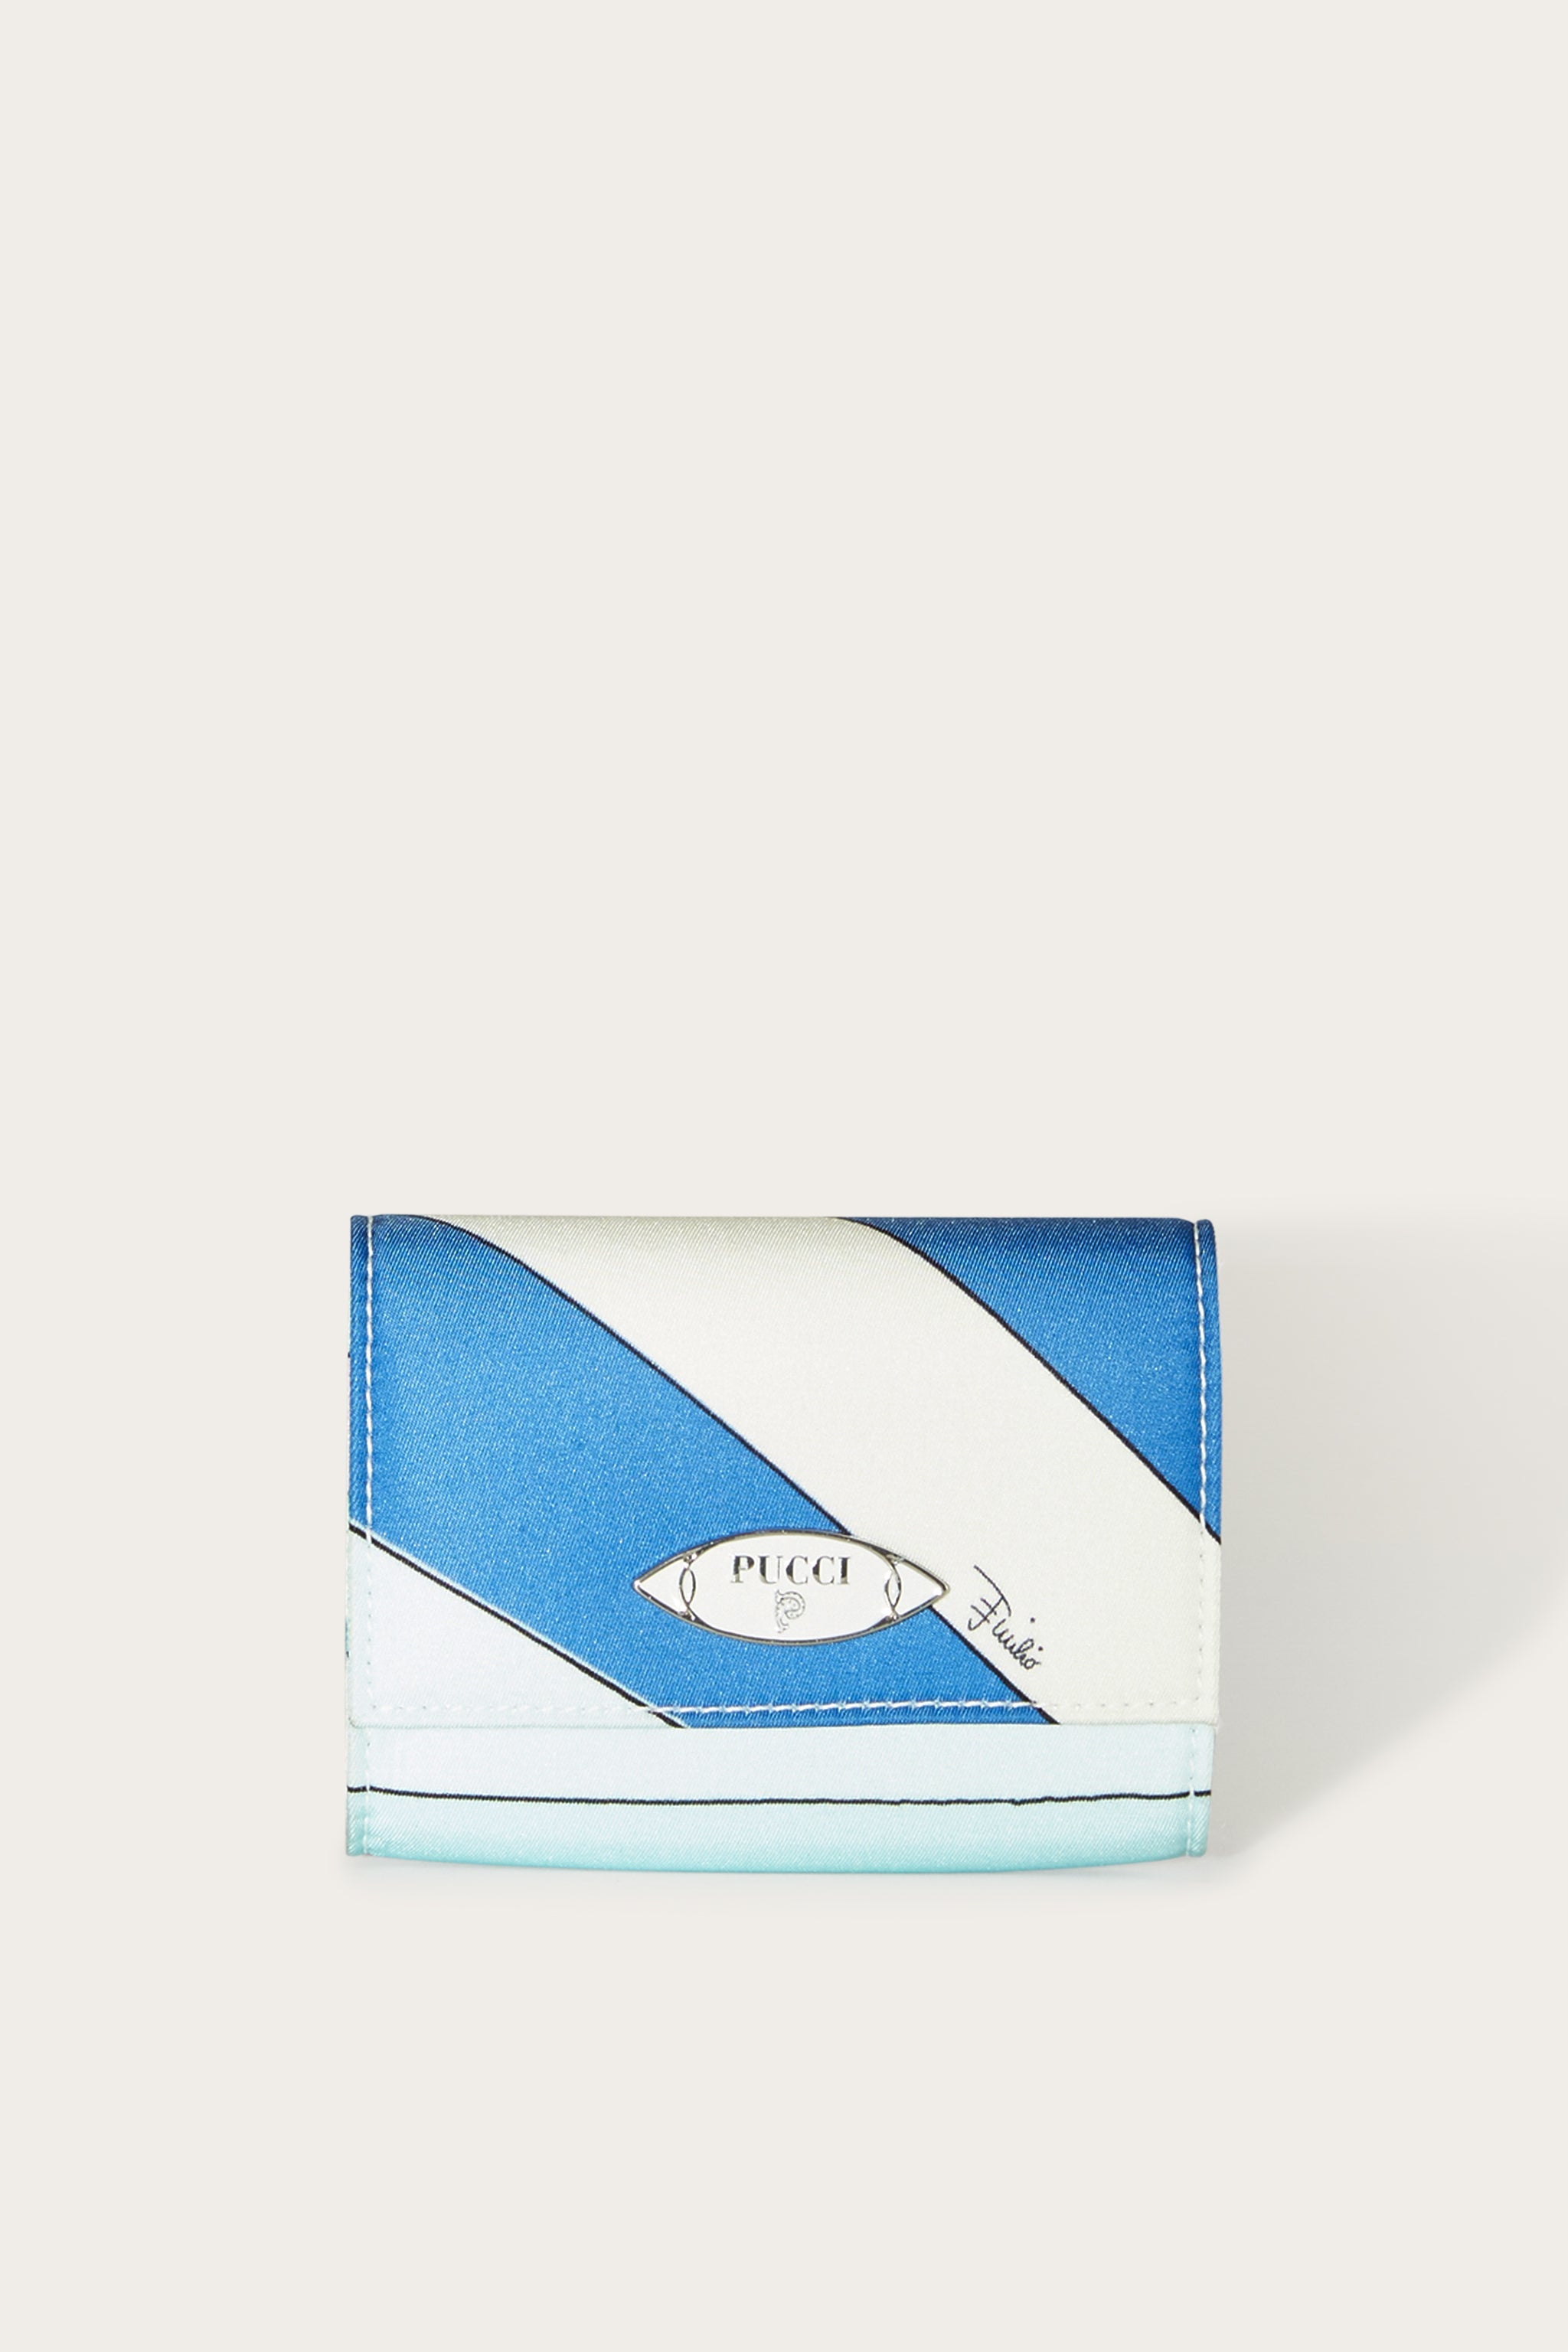 Pucci luxury small leather goods | Pucci